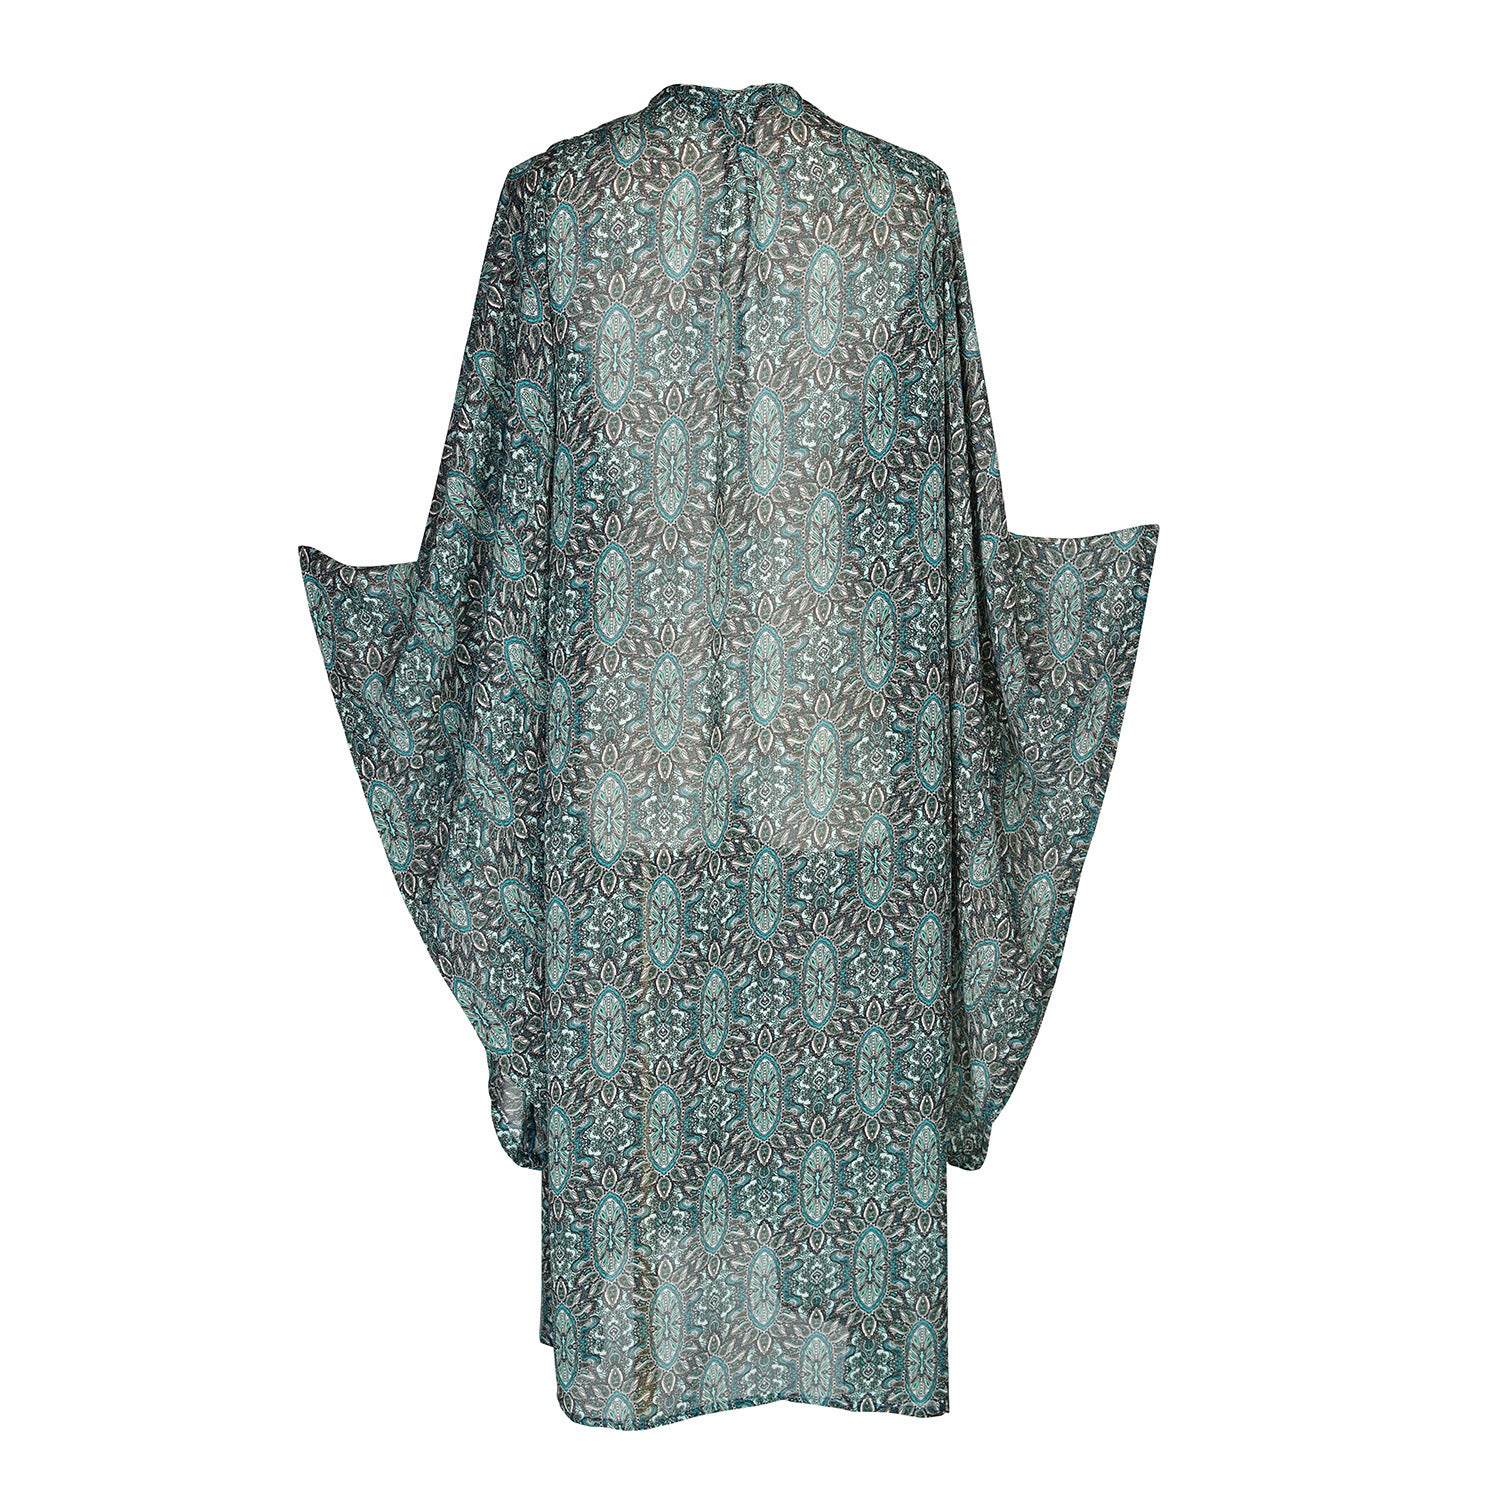 Turquoise tile print, floaty, ethereal, kimono with belt. Made from turquoise printed chiffon, its tile print is reminiscent of jewelry. Can be worn open as a robe or wrap dress. Long flowy sleeves with ankle hem.